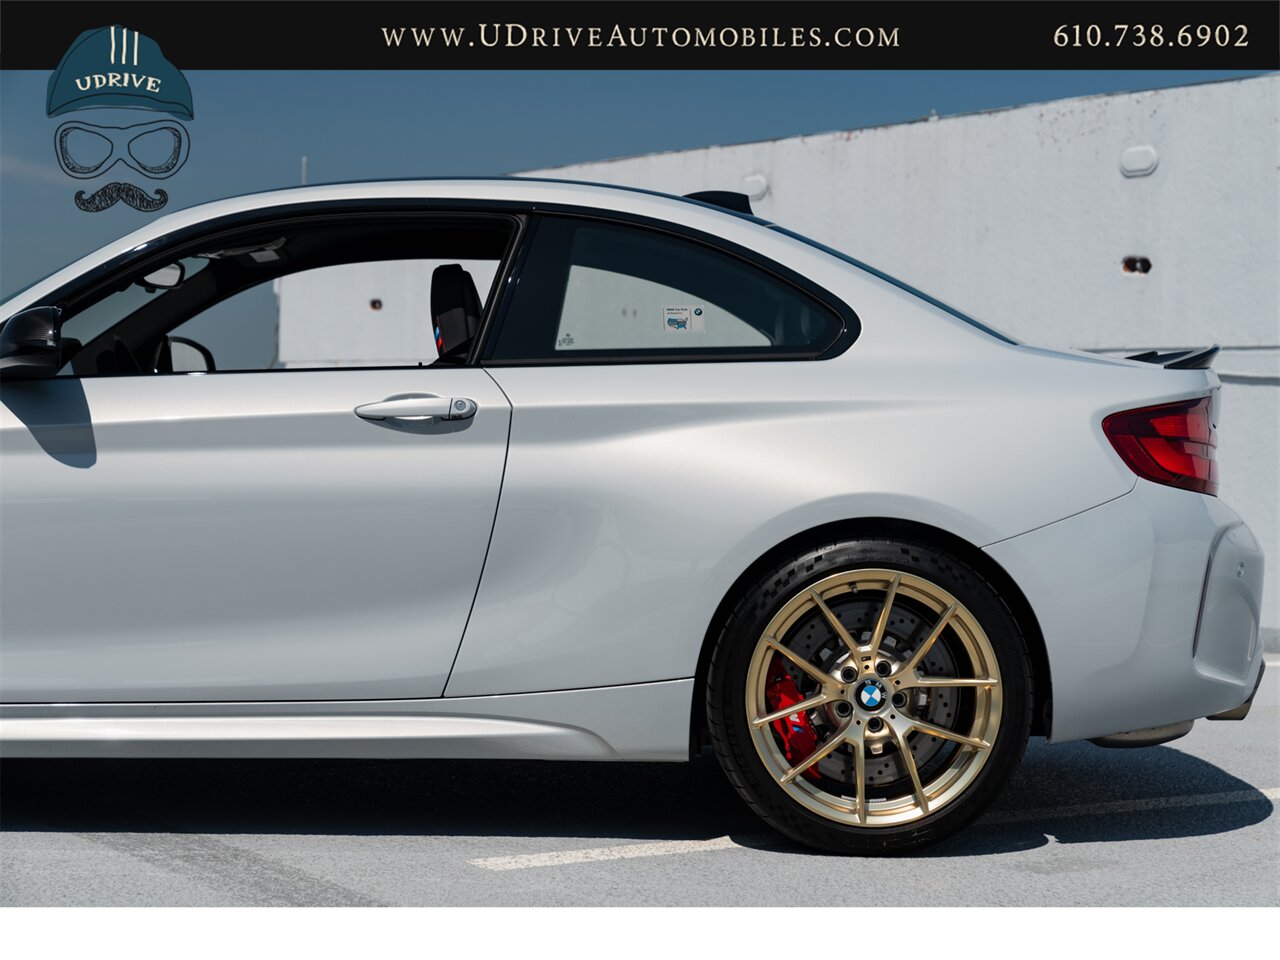 2020 BMW M2 CS  M2 CS 6 Speed Manual 2k Miles Full Body PPF Factory Warranty until 2025 - Photo 28 - West Chester, PA 19382